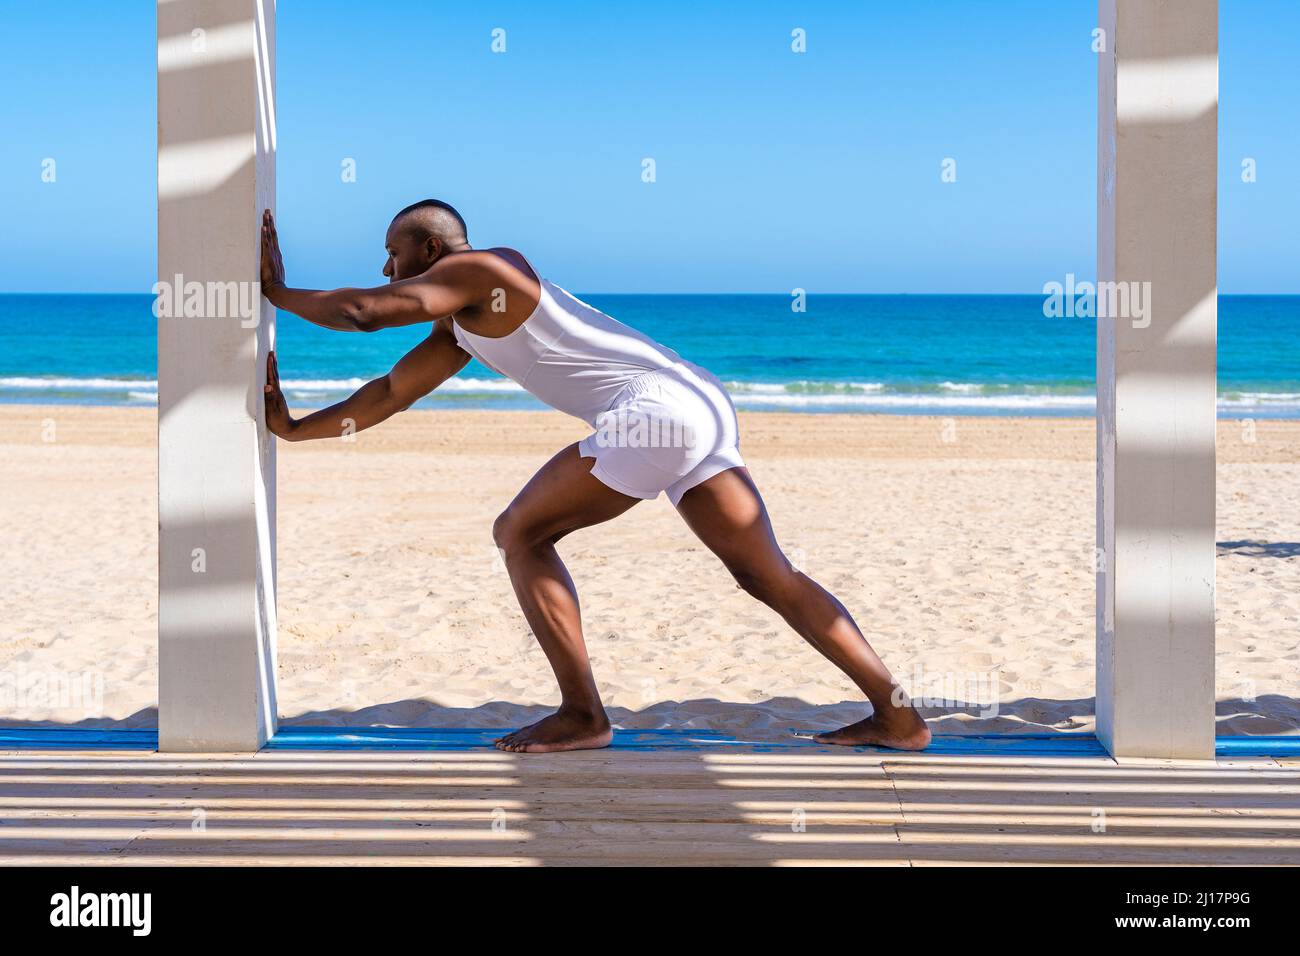 Sportsperson practicing stretching exercise at beach Stock Photo